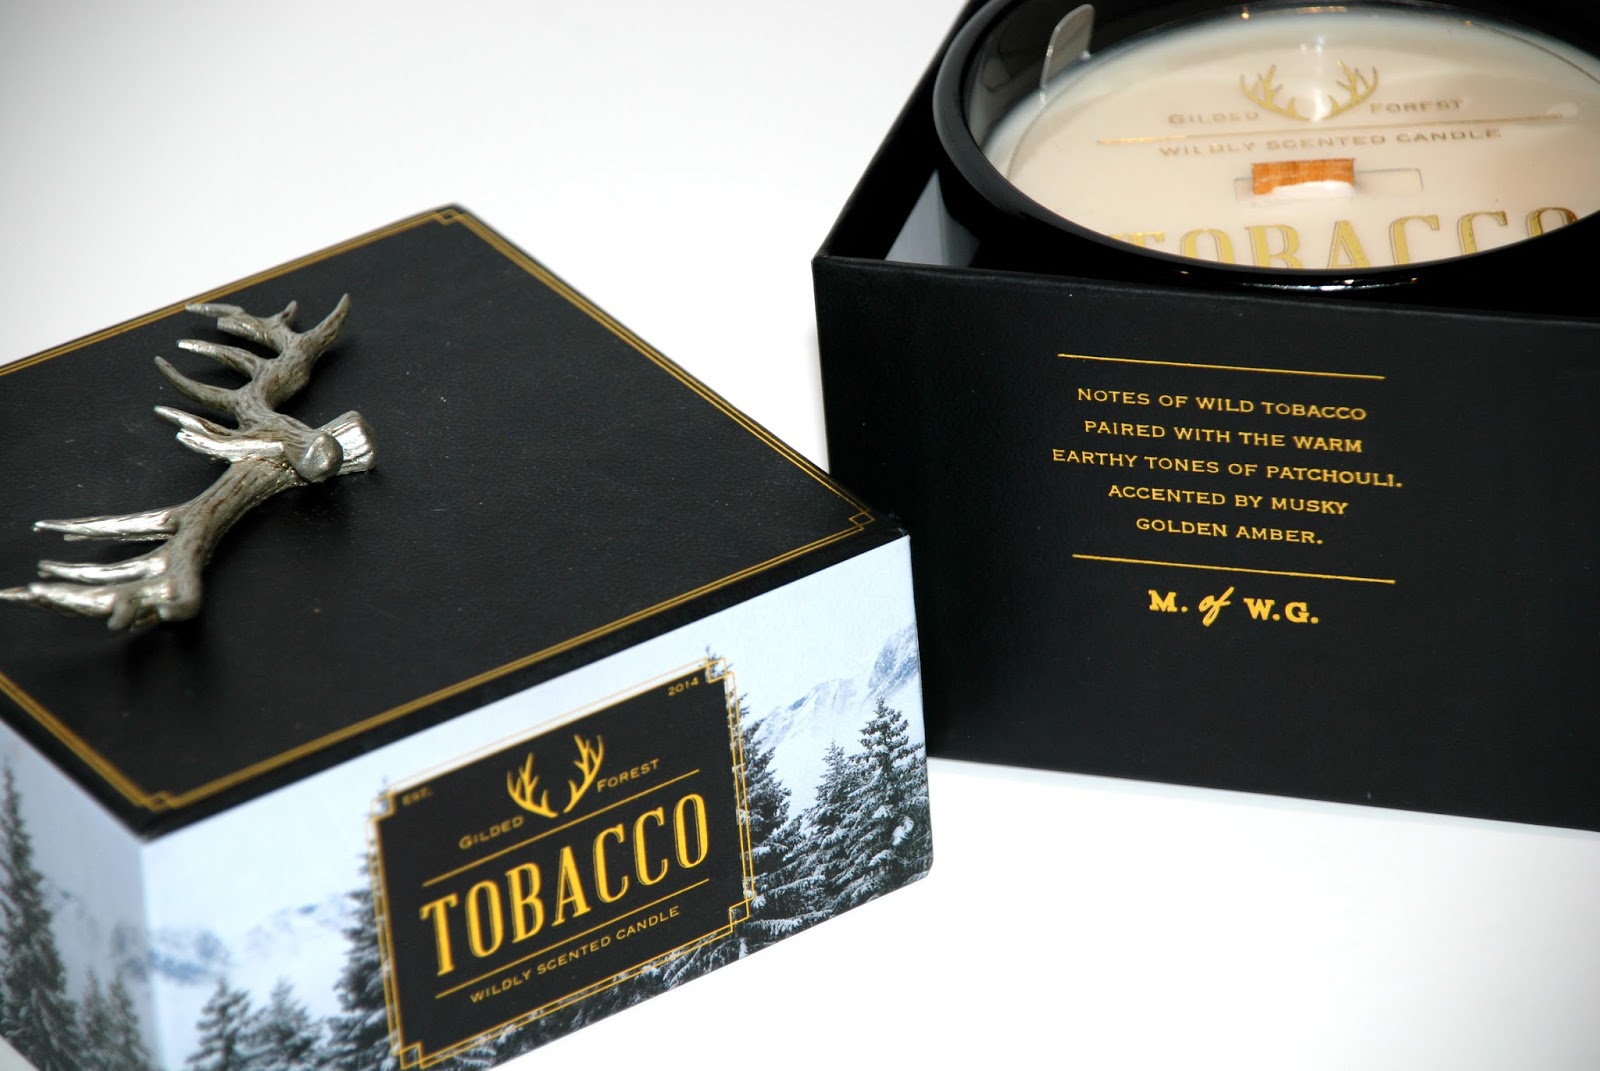 M. of W.G Tobacco Candle